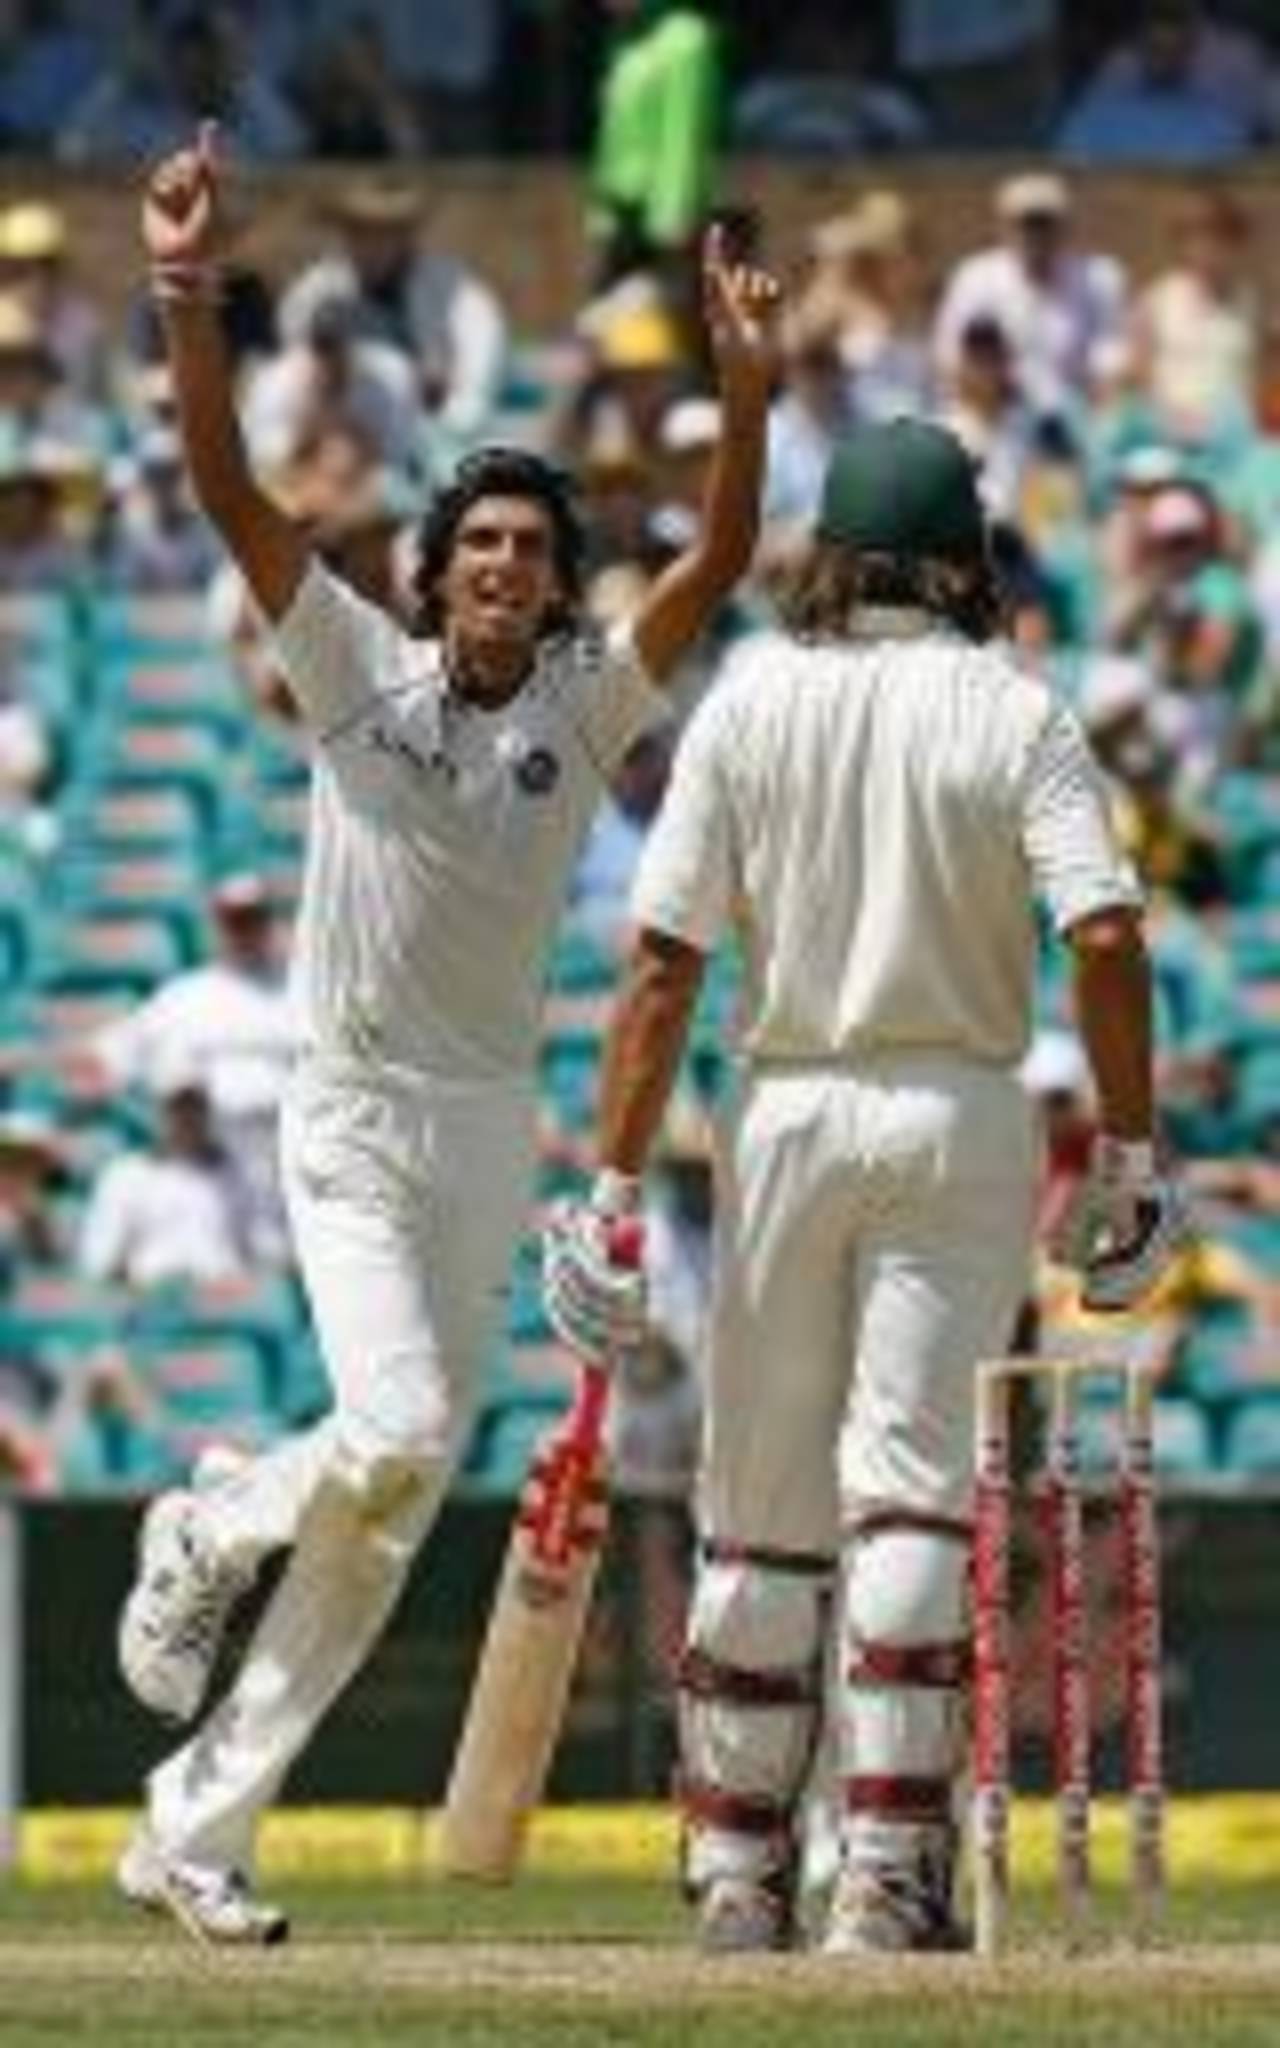 Ishant Sharma was convinced he had Andrew Symonds caught behind, but the umpire disagreed, Australia v India, 2nd Test, Sydney, 1st day, January 2, 2008